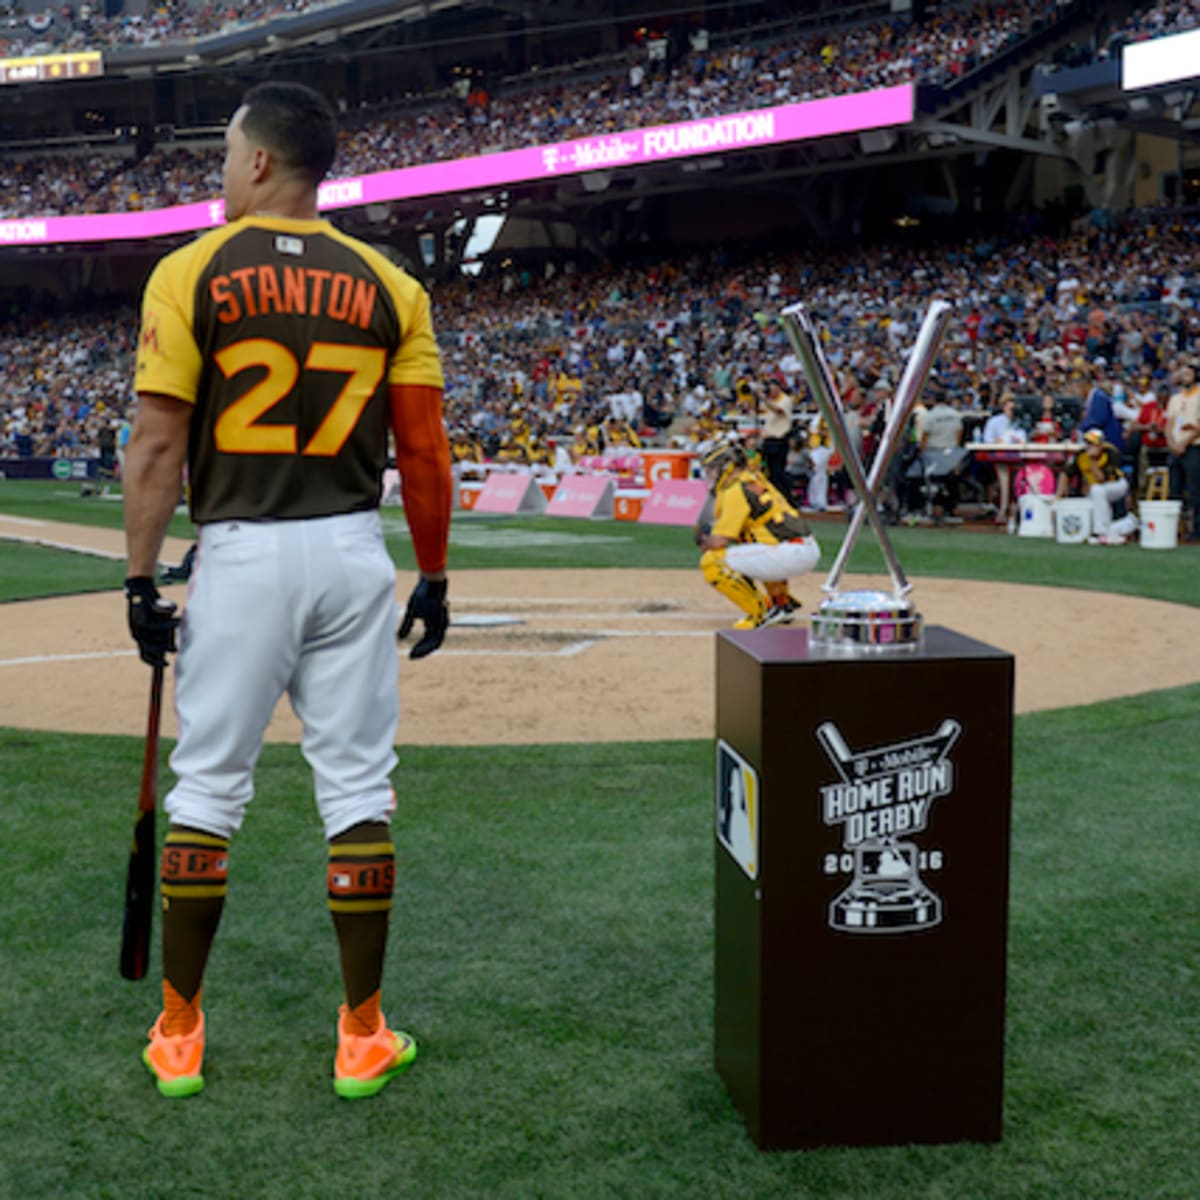 Giancarlo Stanton wins Home Run Derby, beats defending champ Todd Frazier  in final